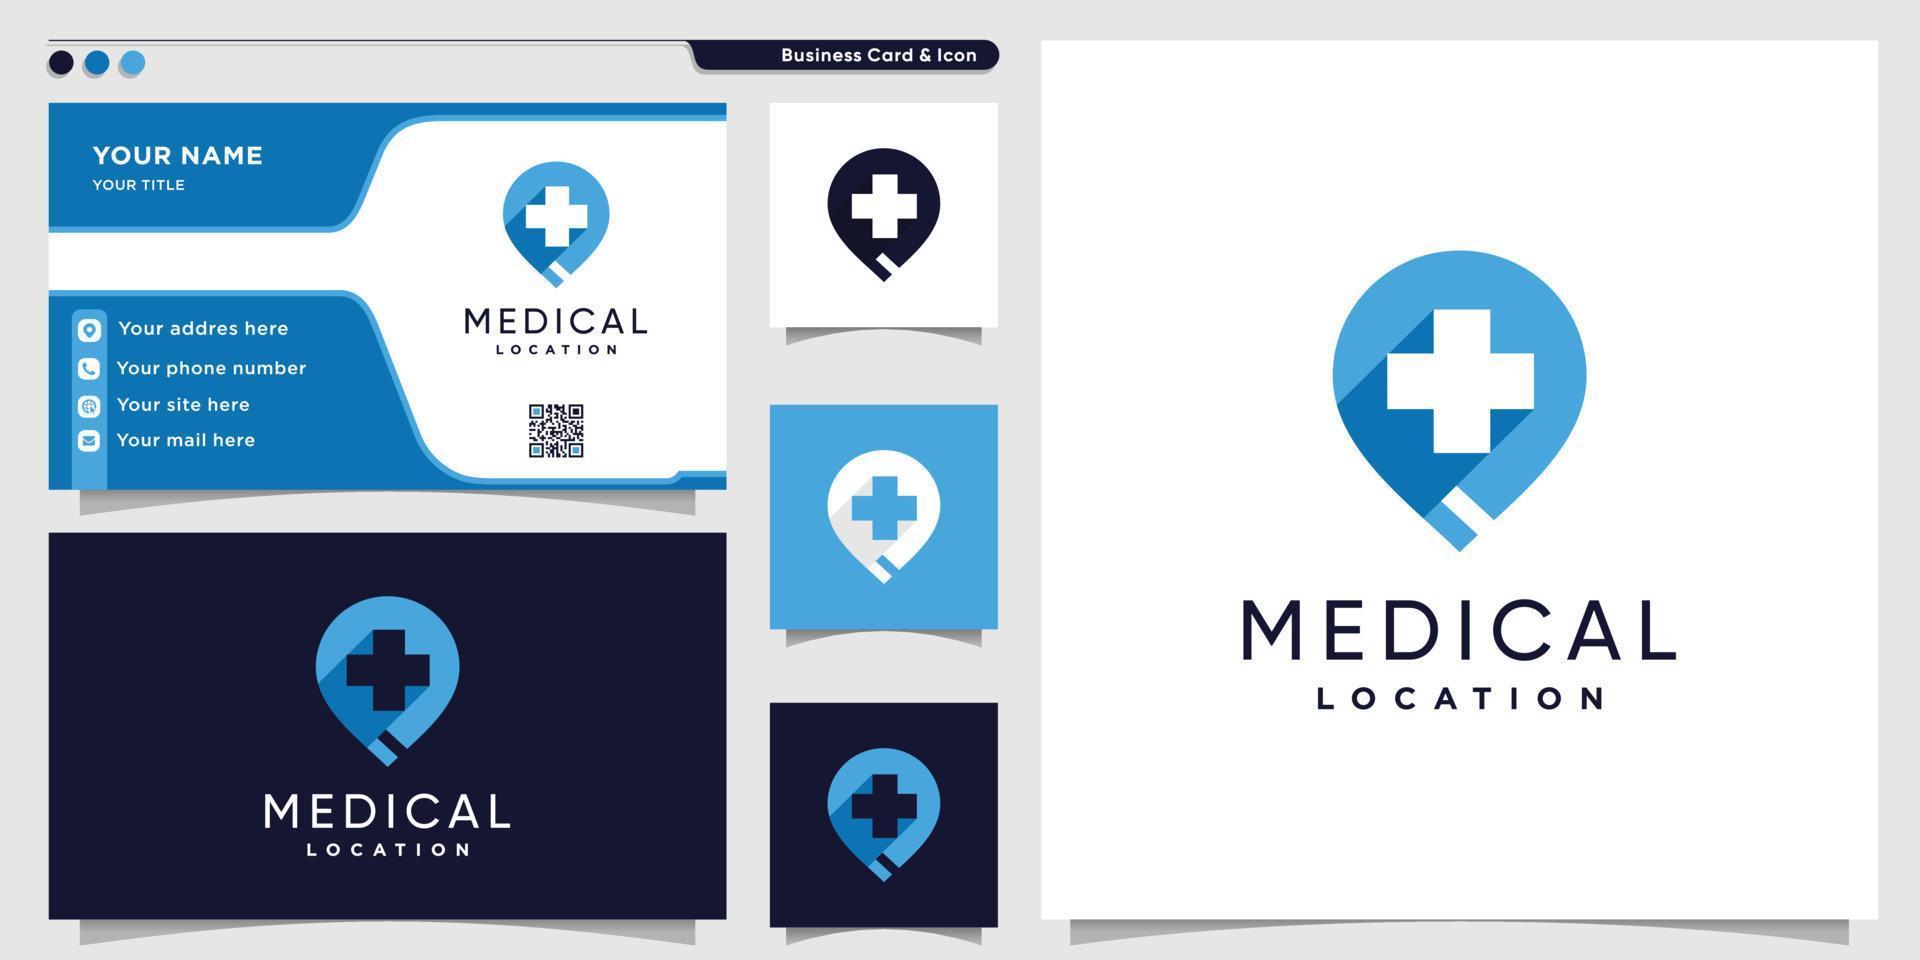 Medical location logo with modern style and business card design template Premium Vector